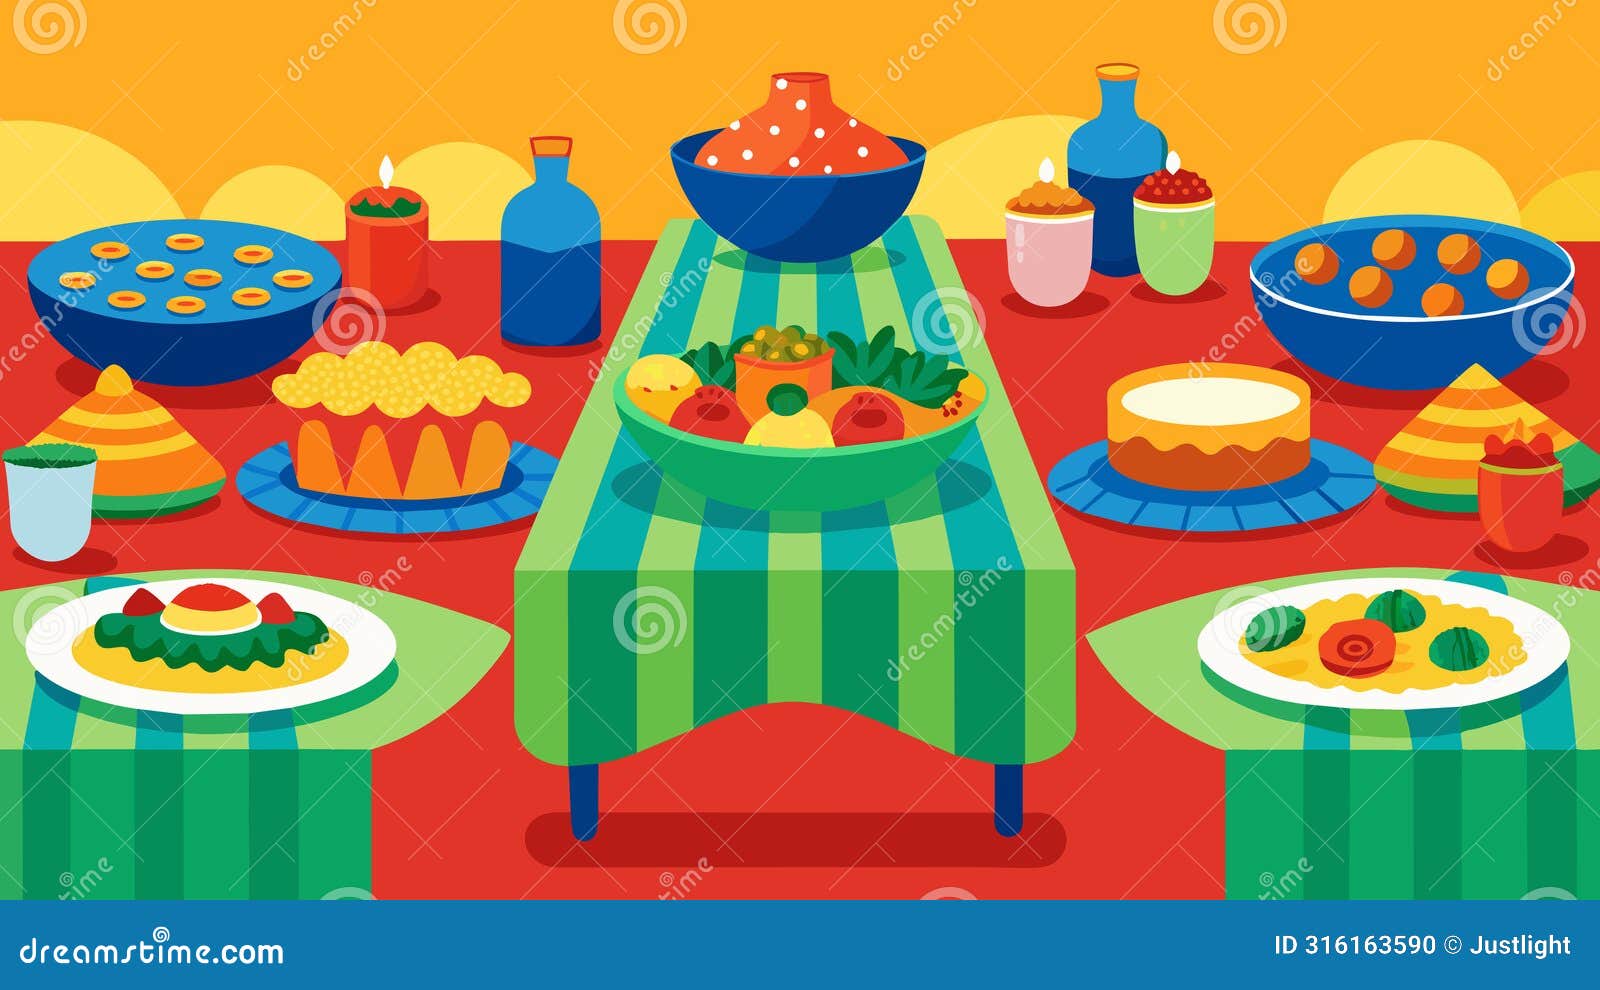 tables adorned with colorful tablecloths and an array of dishes representing the diverse backgrounds of the community